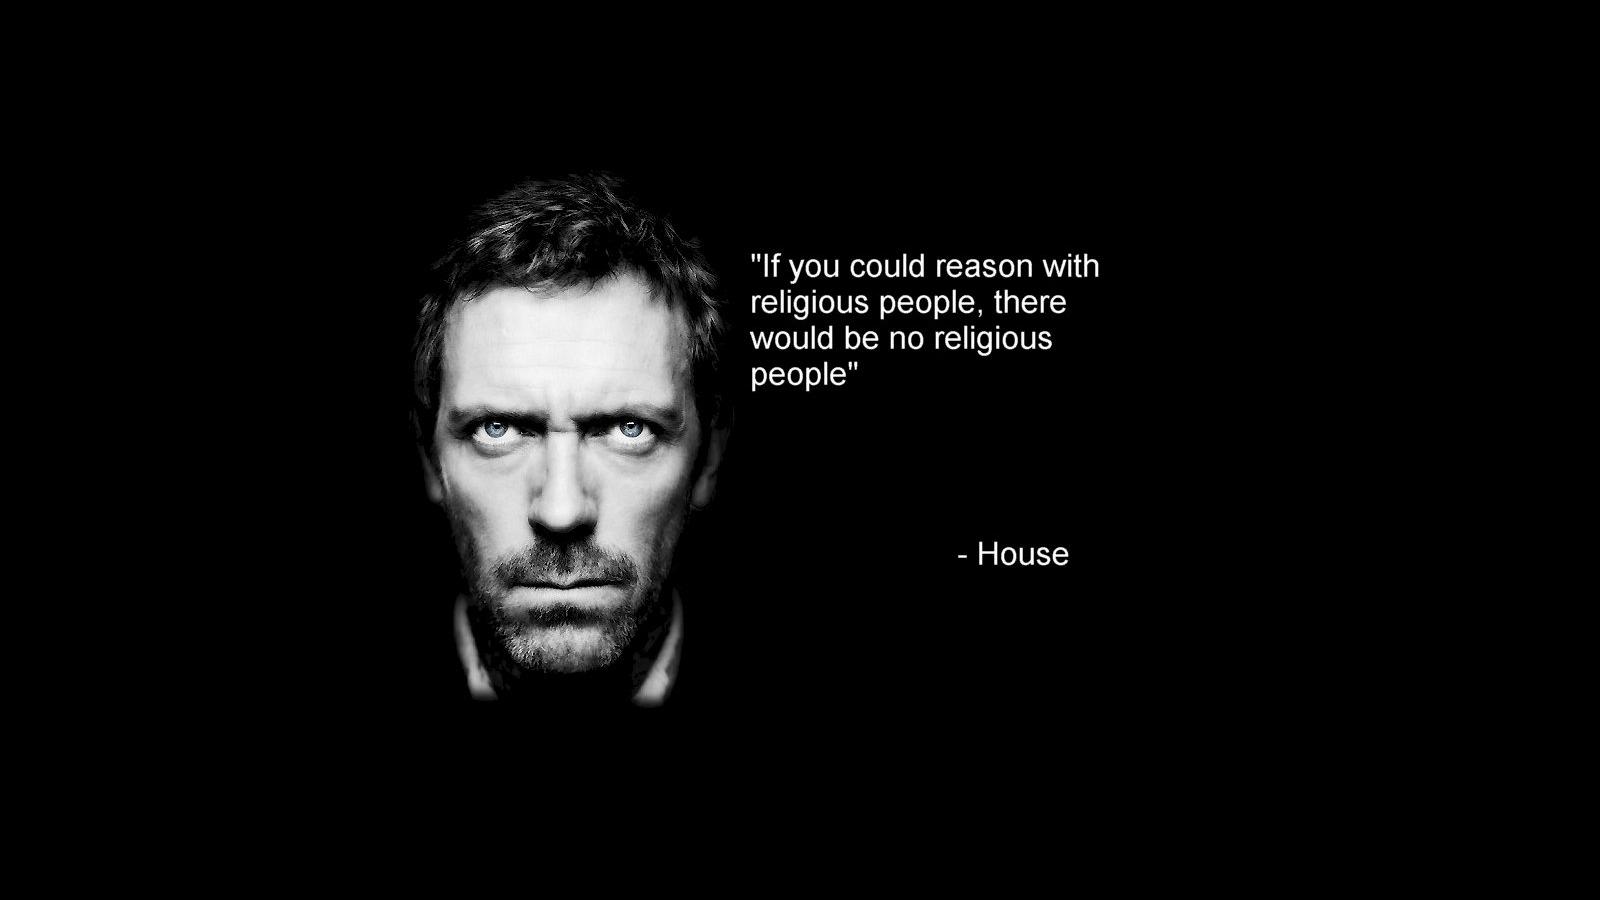 Wallpaper Quotes Stupidity Dr House Religion Hugh